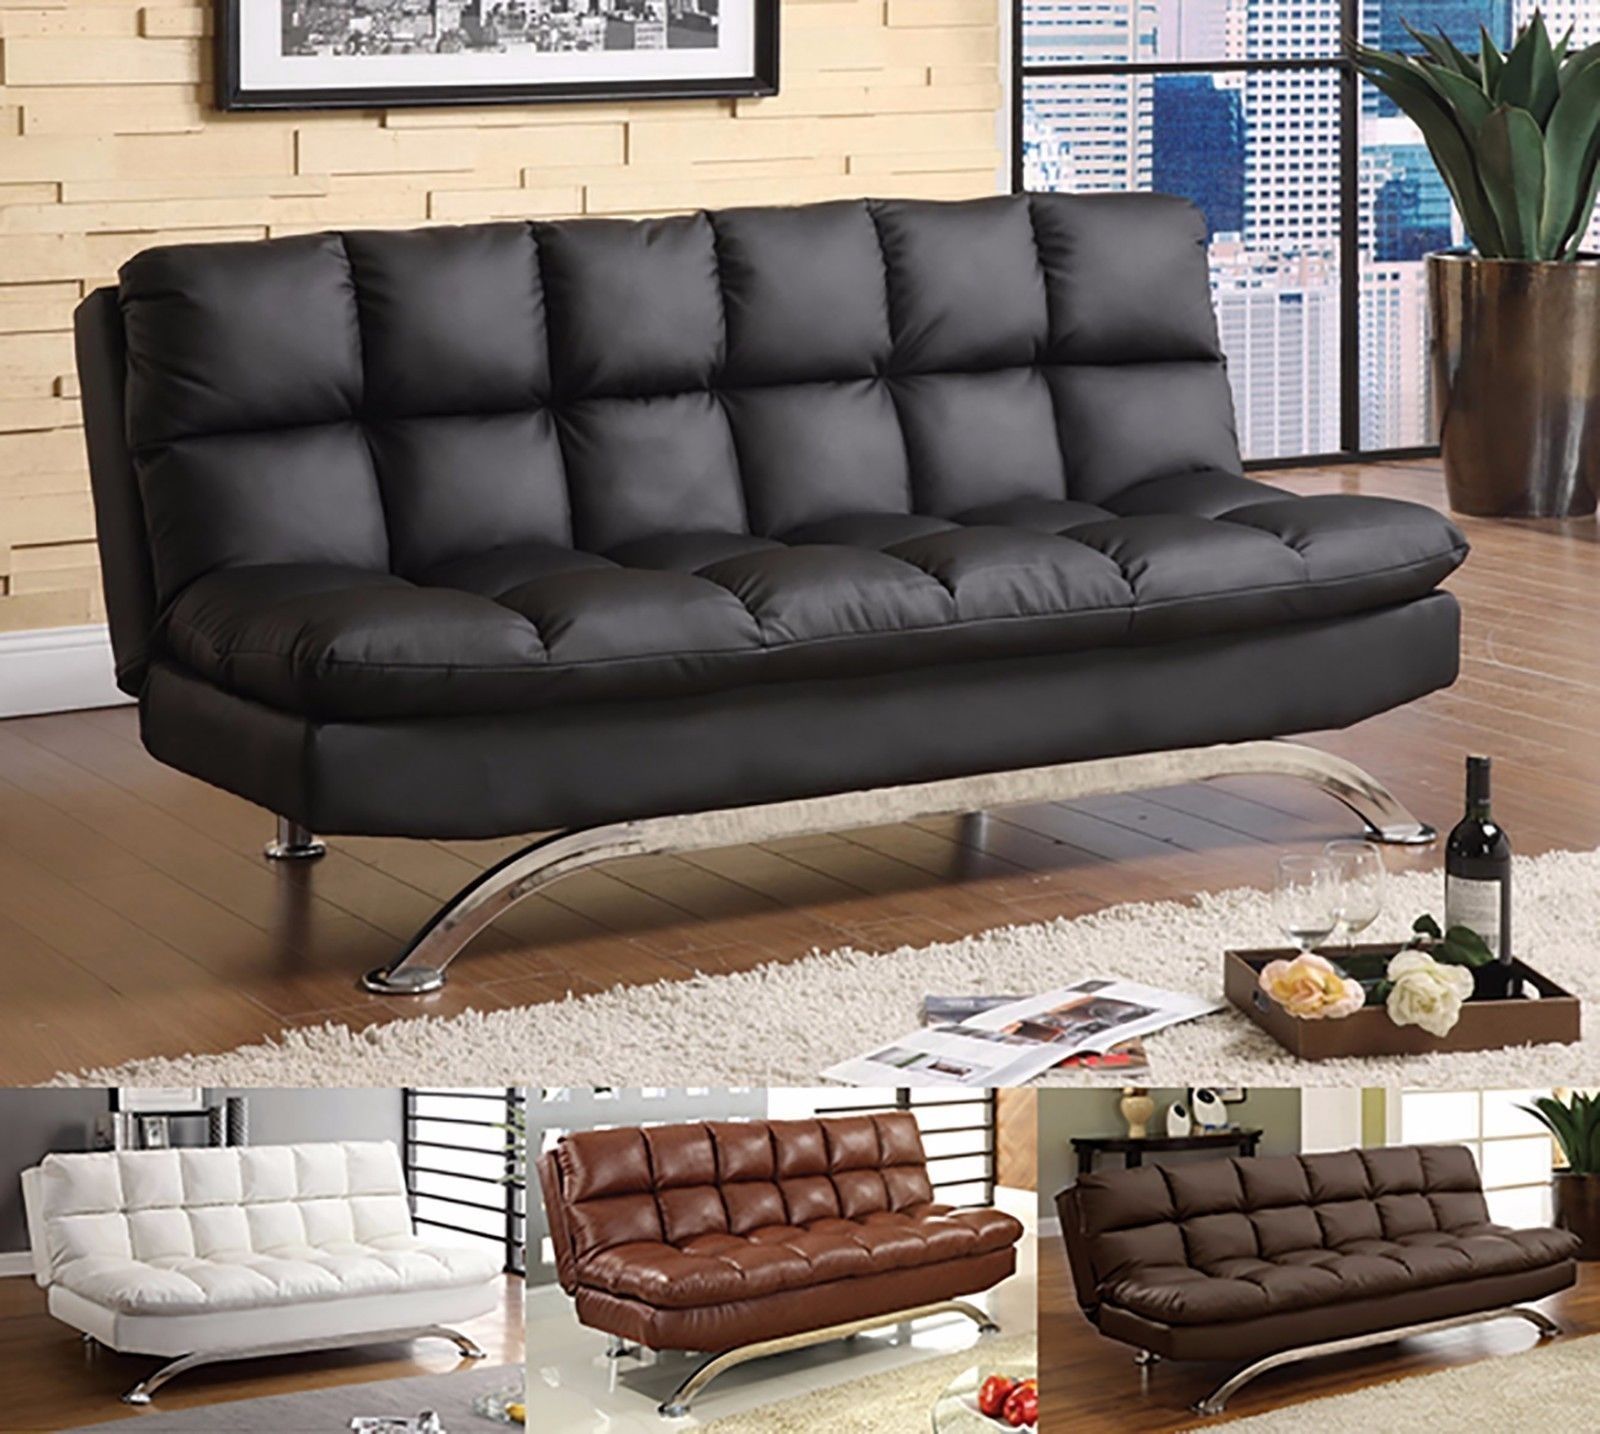 Furniture : Mattress Firm University Fold Out Couch Sleeper Pertaining To Tuscaloosa Sectional Sofas (View 6 of 10)